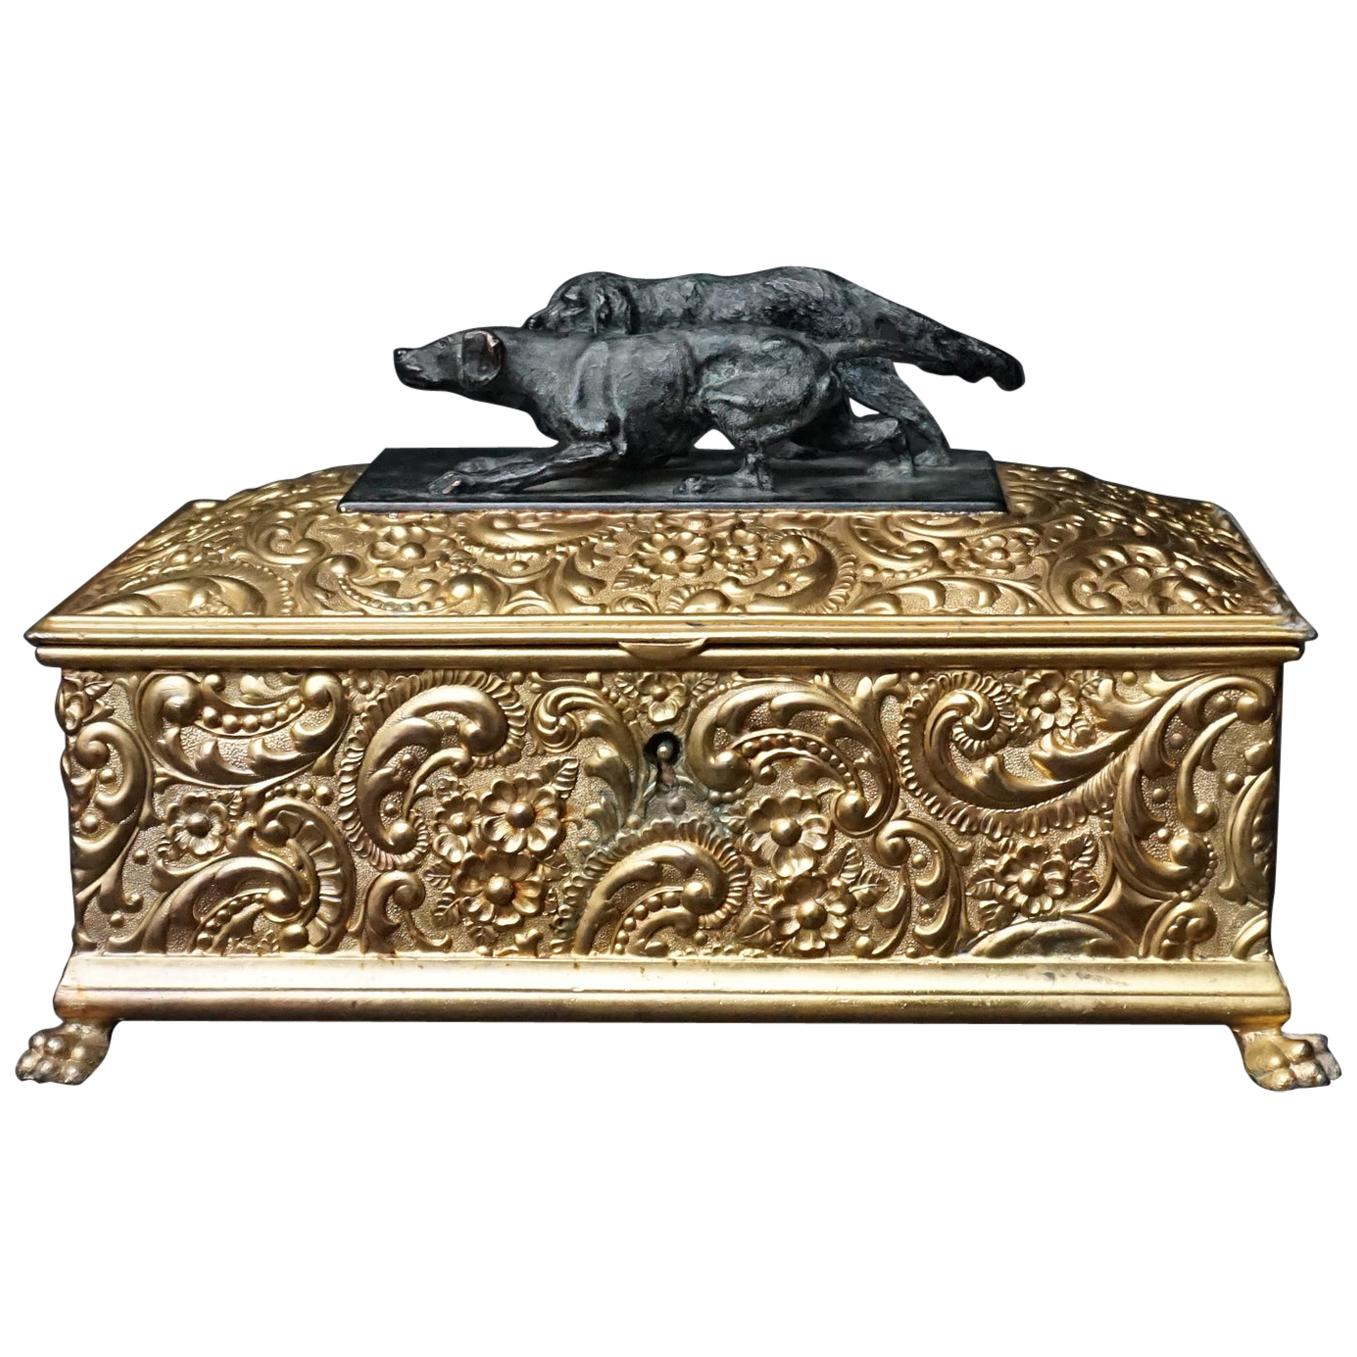 19th Century Meriden Wilcox Gilt Silver Plate Humidor with Bronze Hunting Dogs For Sale